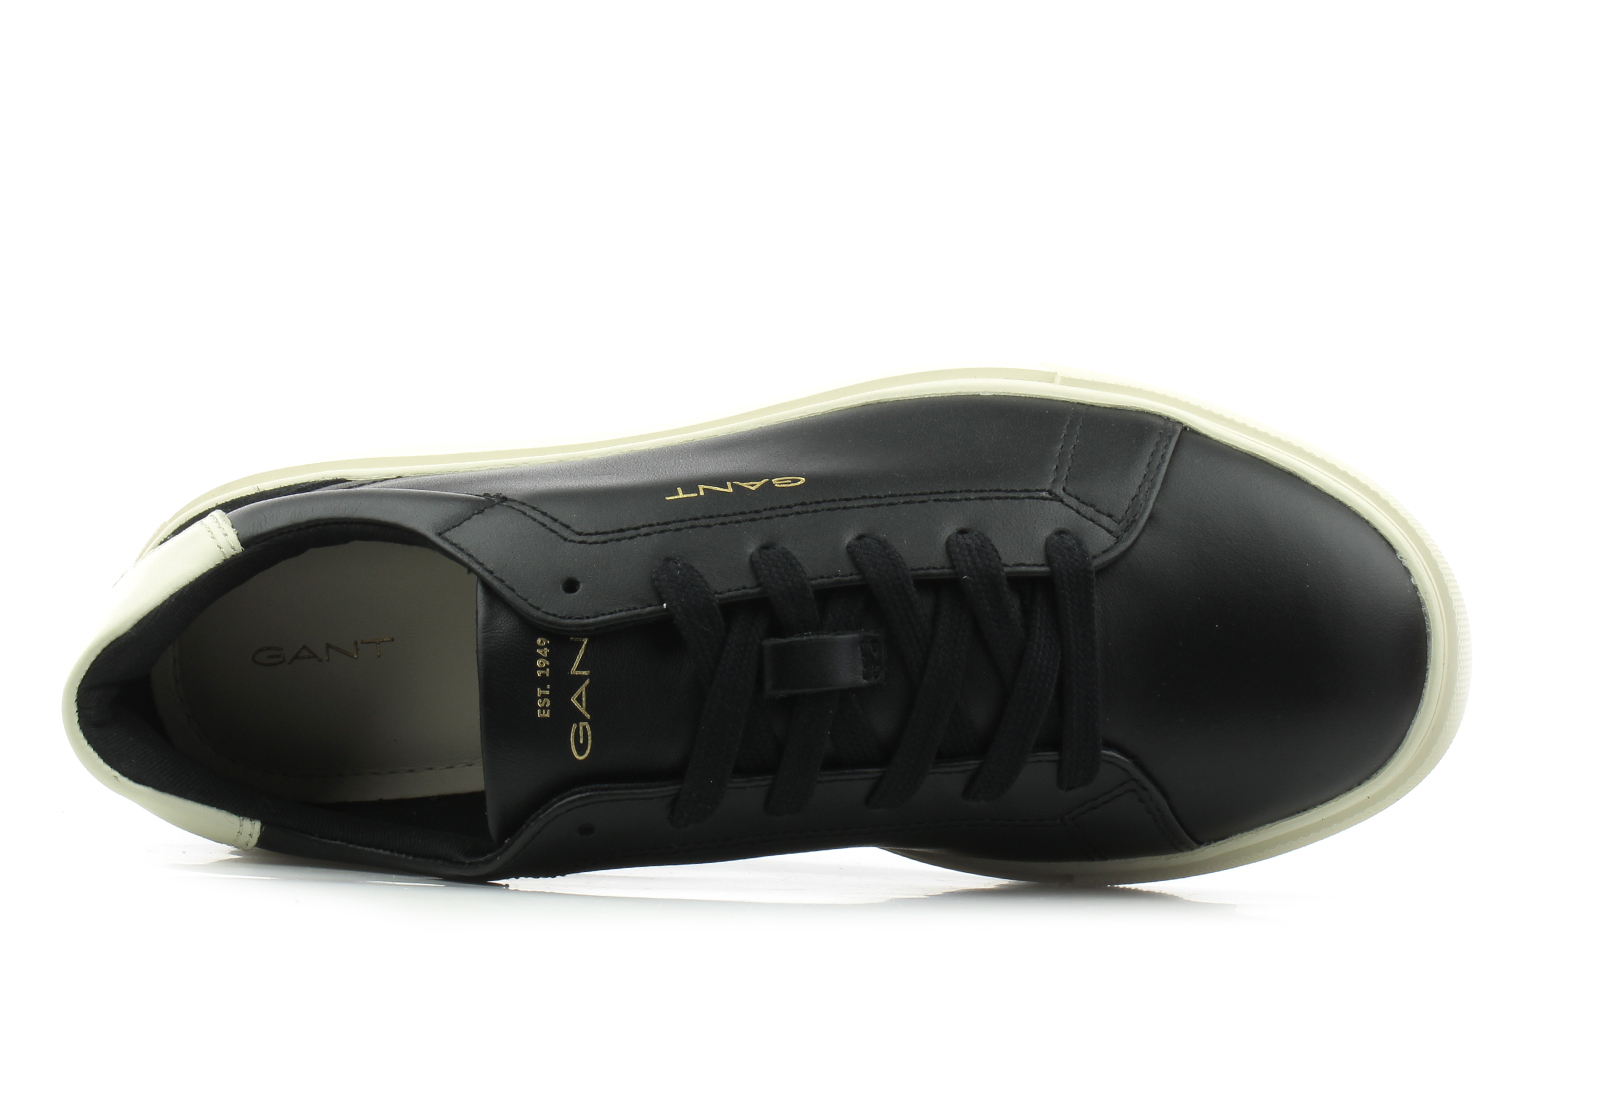 Gant Trainers - Julice - 27531173-G00 - Online shop for sneakers, shoes ...